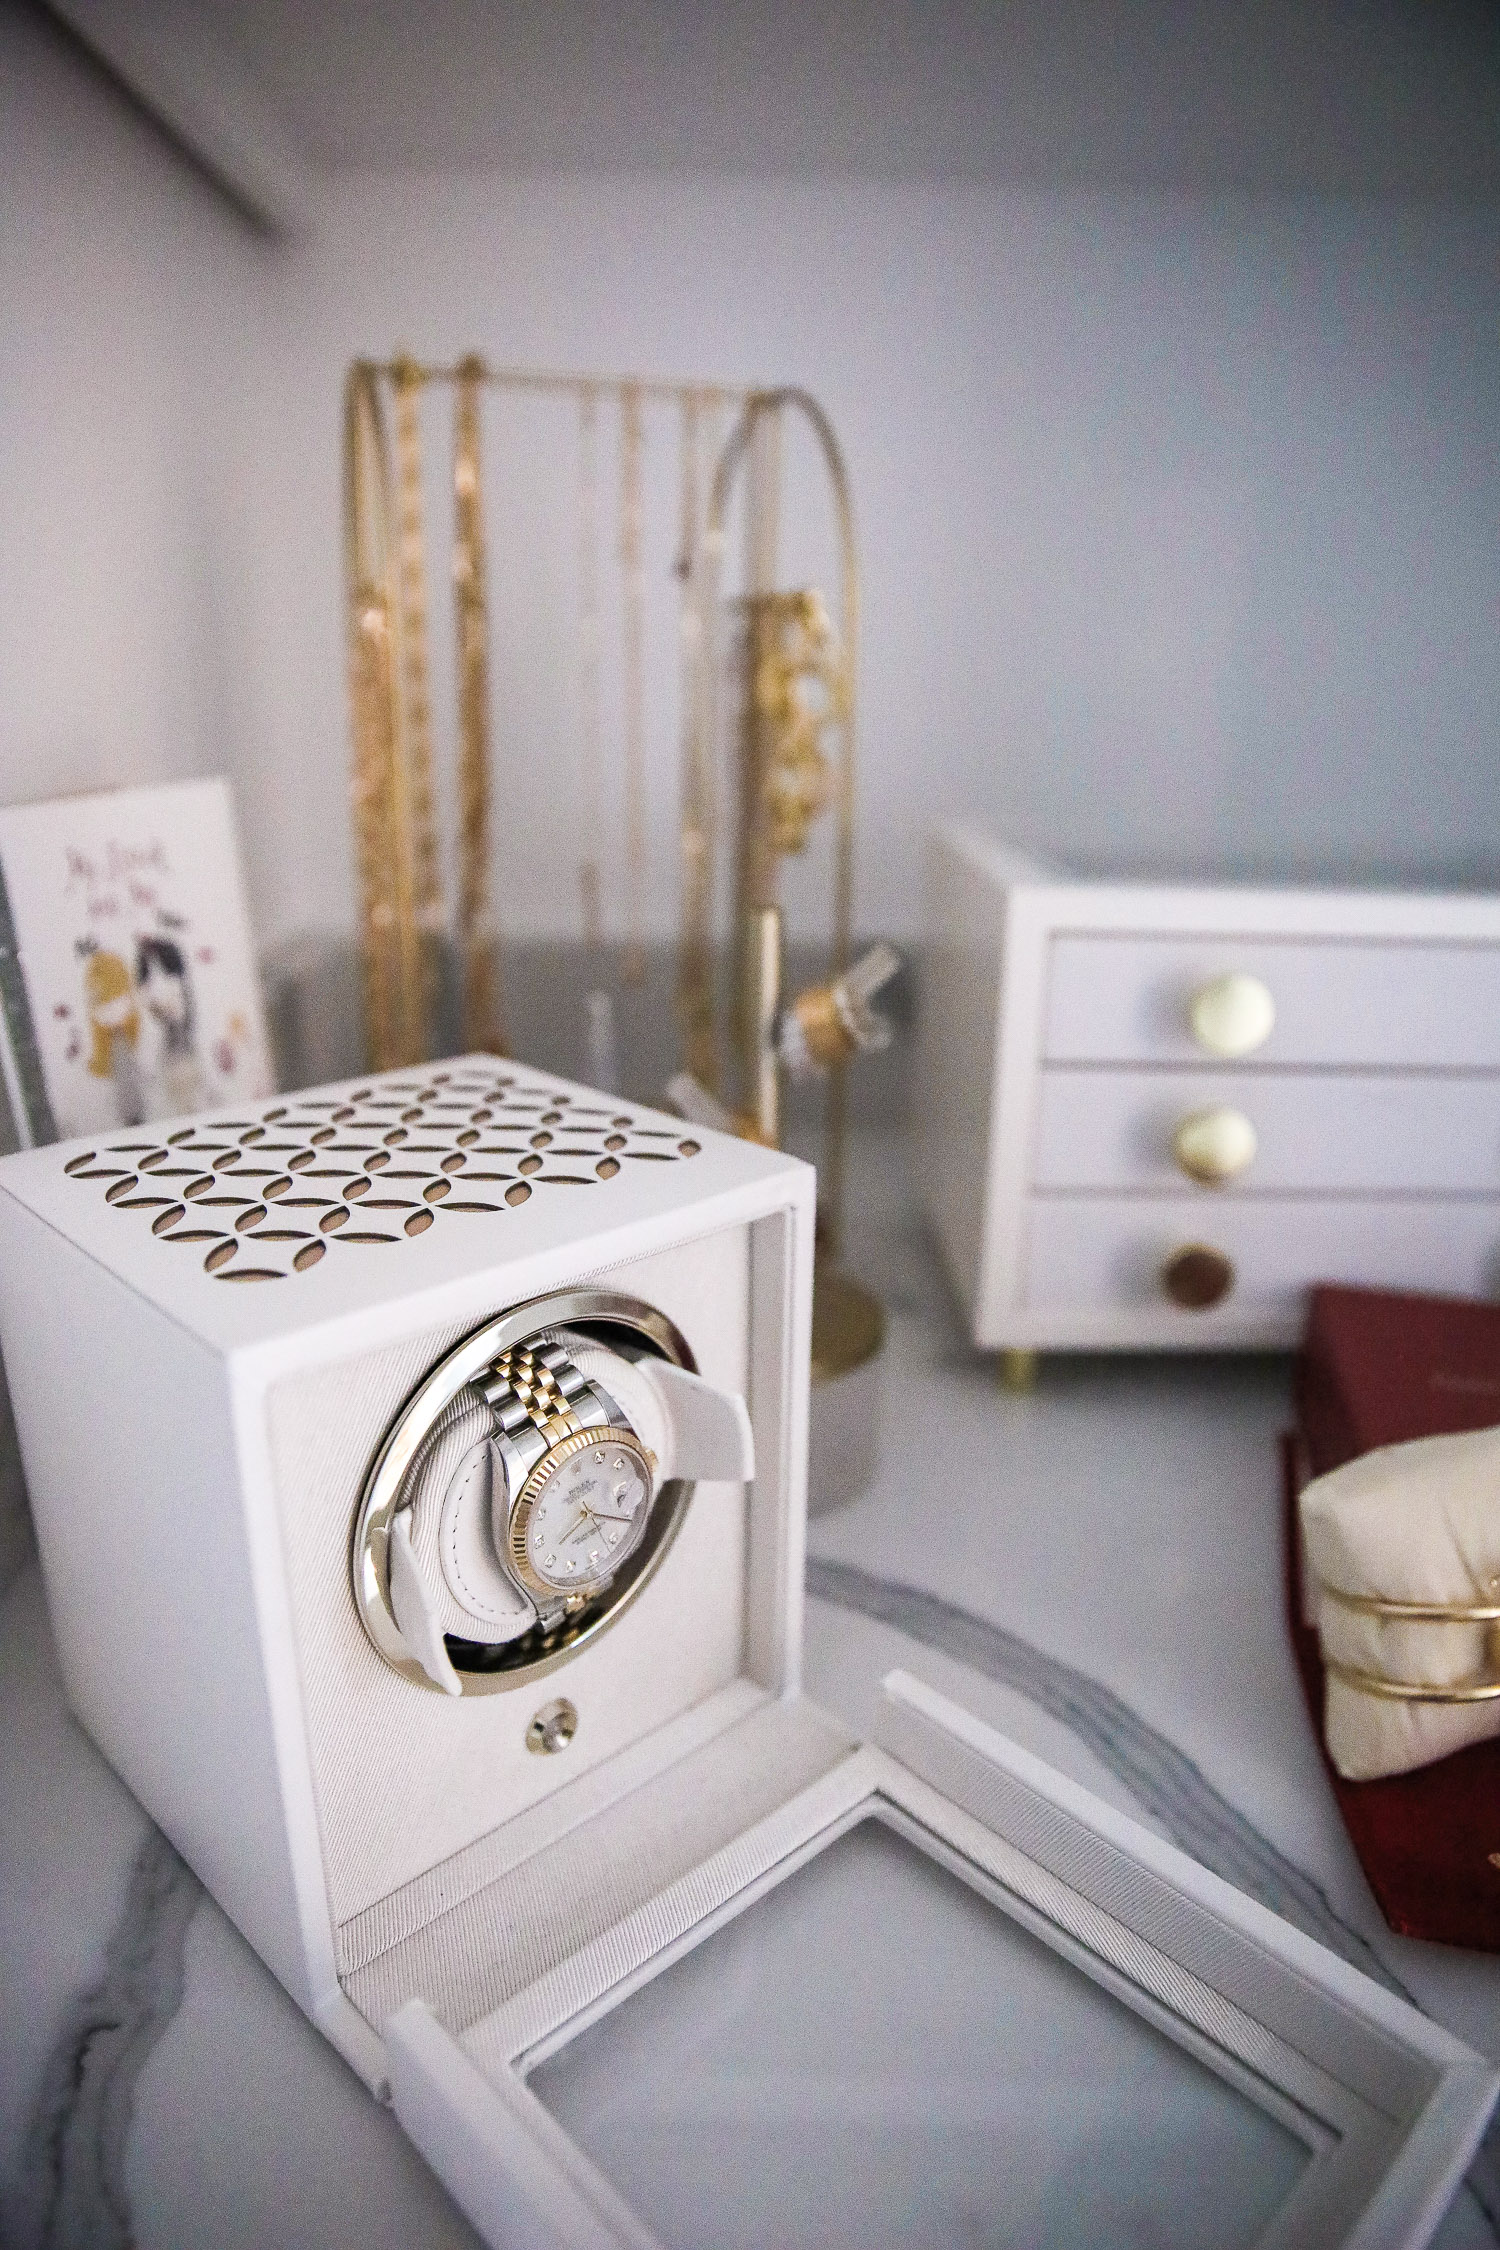 rolex watch winder, white wolf Rolex watch winder, Emily Gemma | Nighttime Routine by popular US beauty blog, The Sweetest Thing: image of a watch winder box, white jewelry box, and gold jewelry rack. 